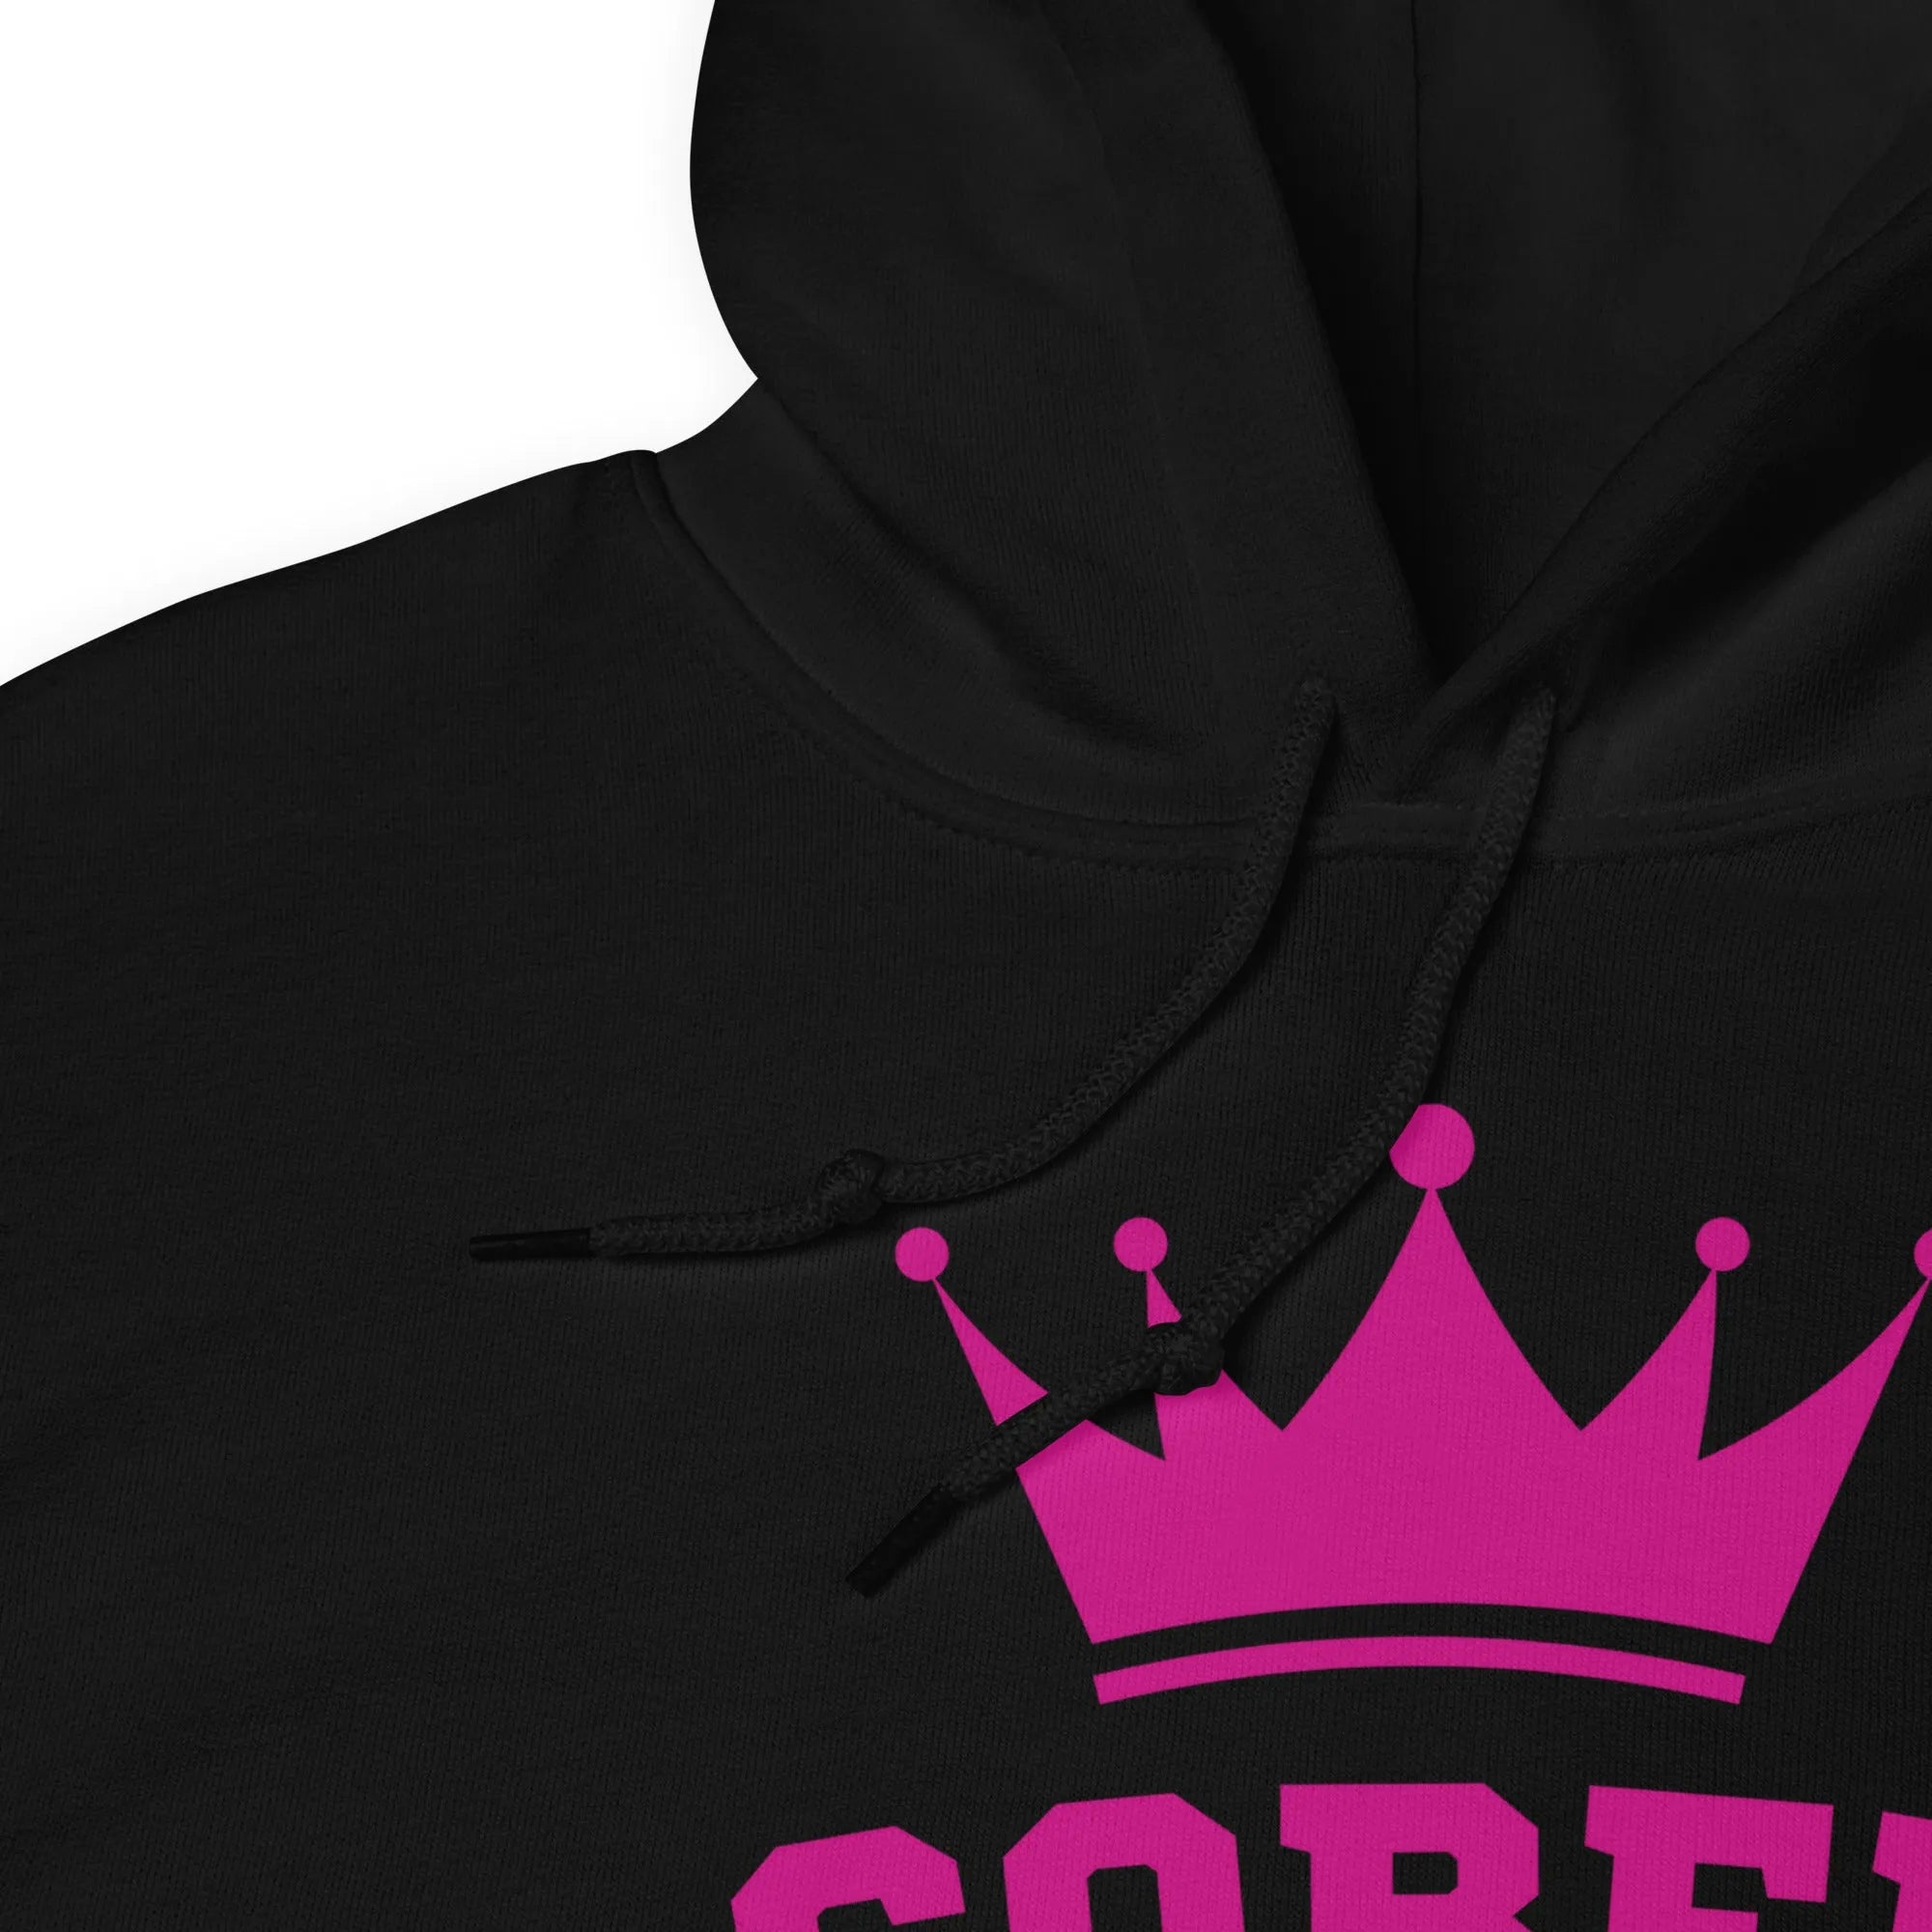 Sober Queen Hoodie: Embrace Your Sobriety and Rule Your Realm - Sobervation